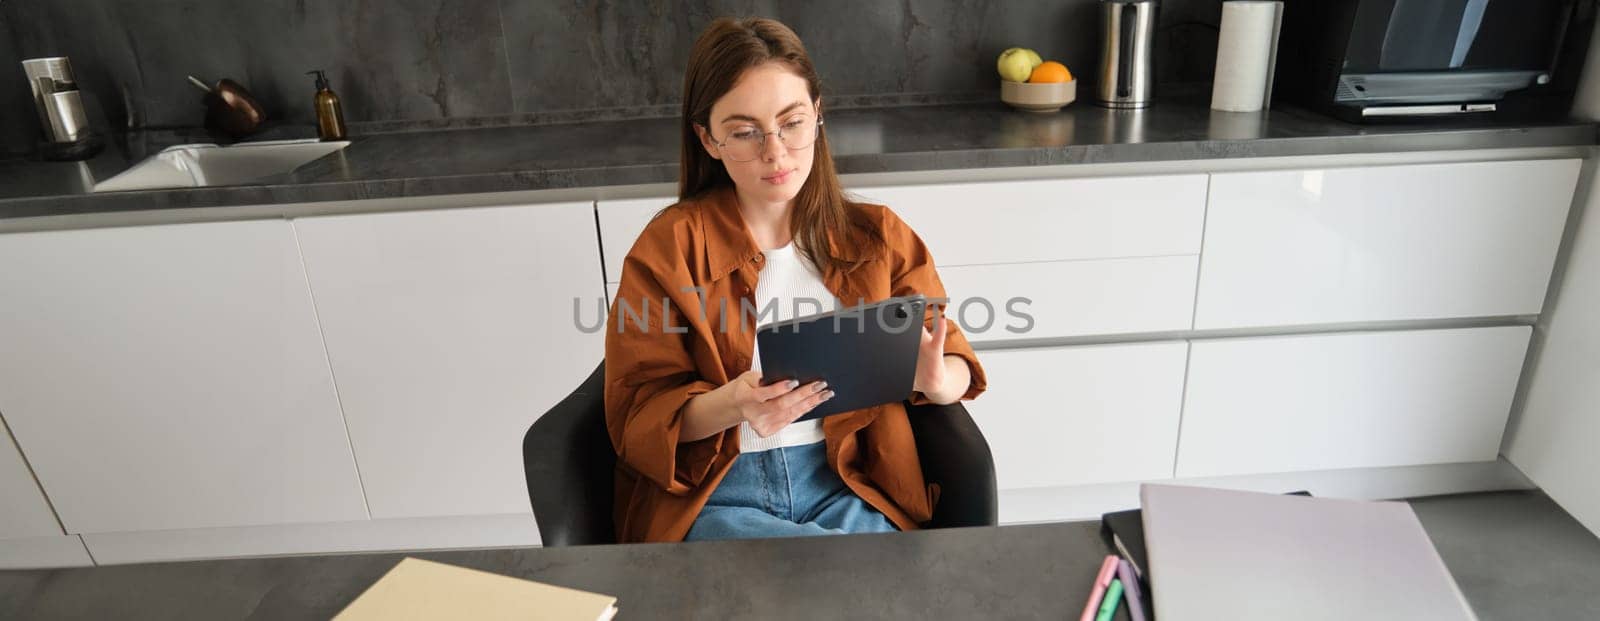 E-learning and remote education concept. Young woman in glasses, works from home in kitchen, looking at digital tablet, connects to online class or course.